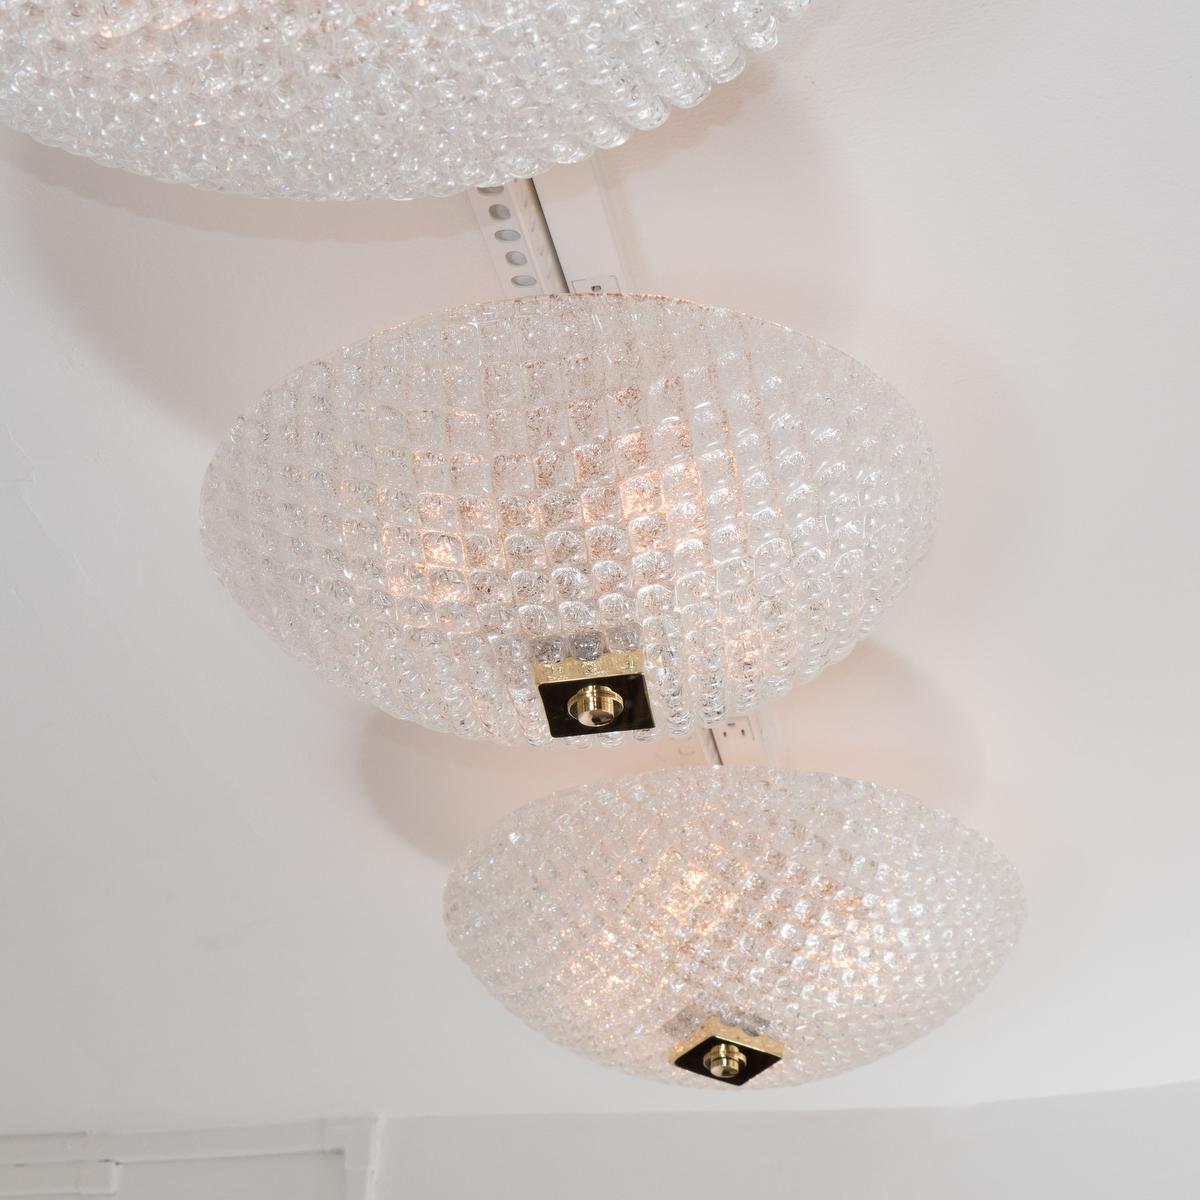 Small dome form textured glass flush mount fixture with brass finial.